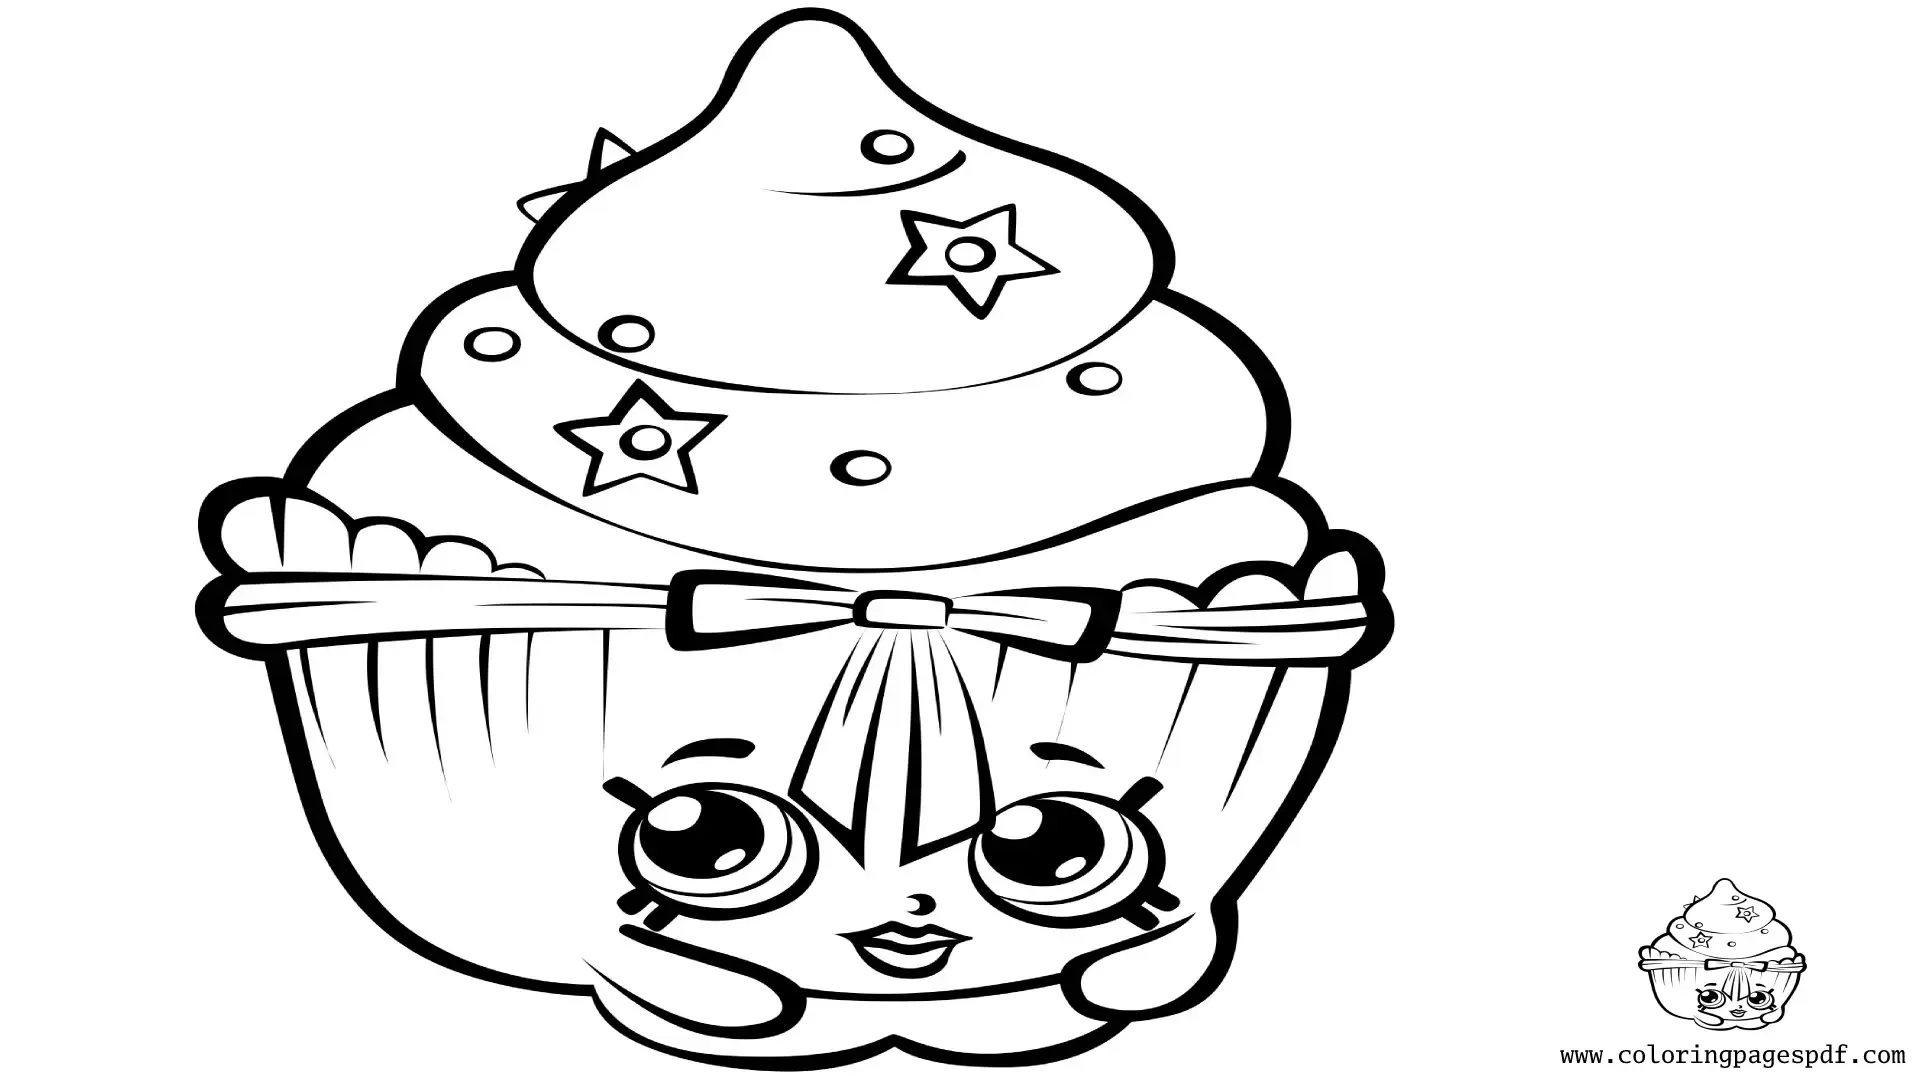 Coloring Page Of Patty Cake